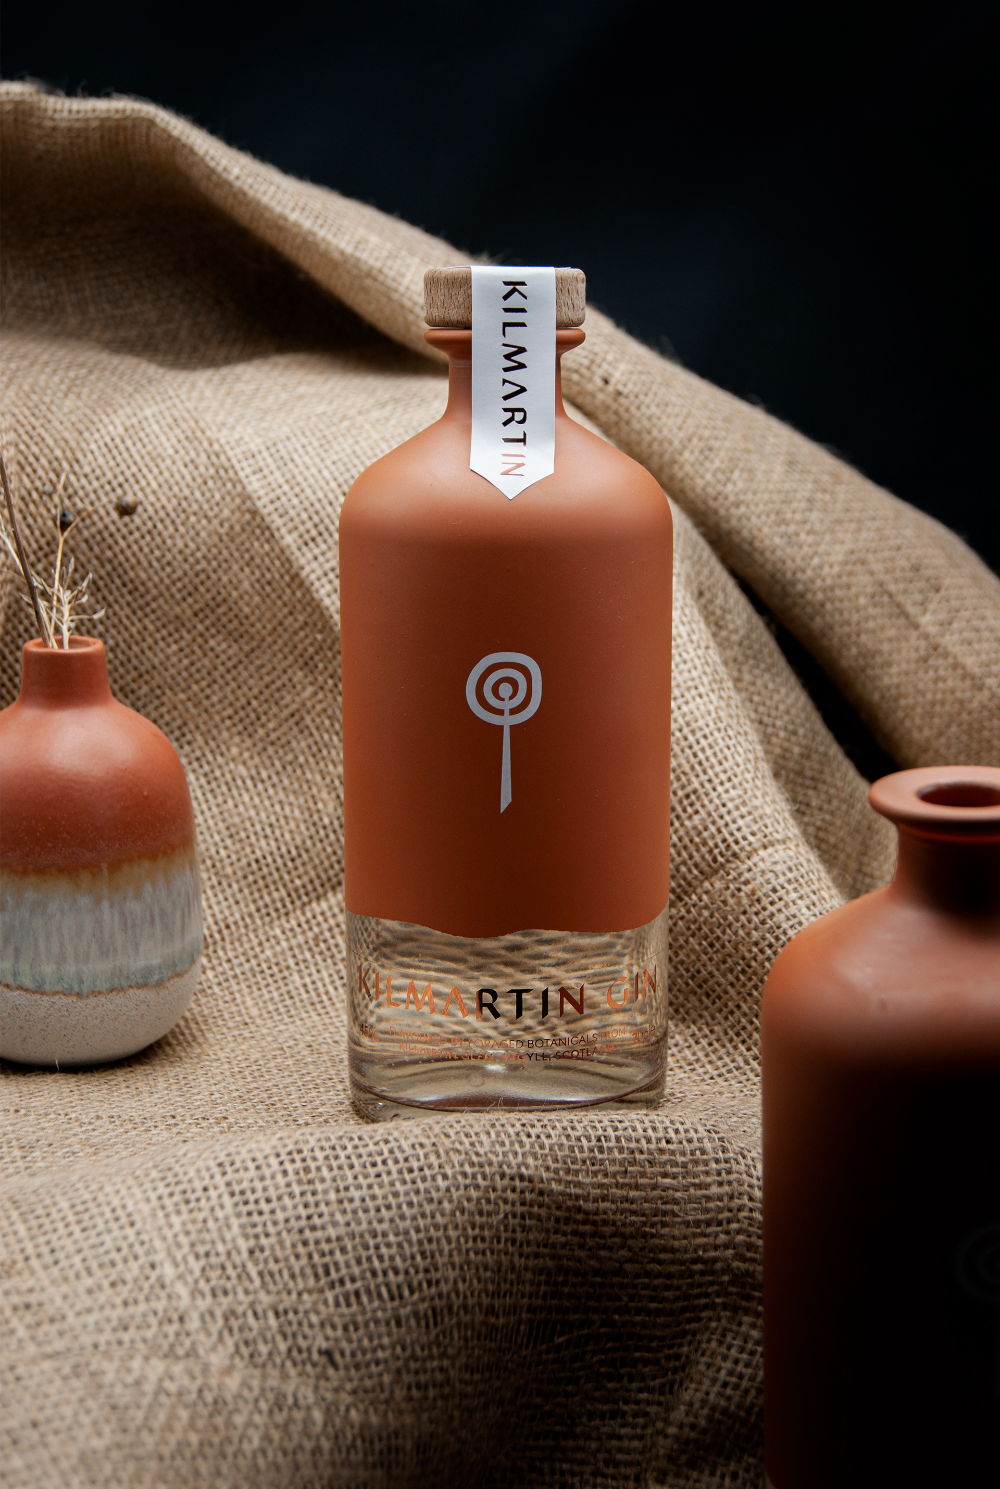 Kilmartin Glen Spirits’ Packaging Is Inspired By Elements That Coexist With Cultural Heritage